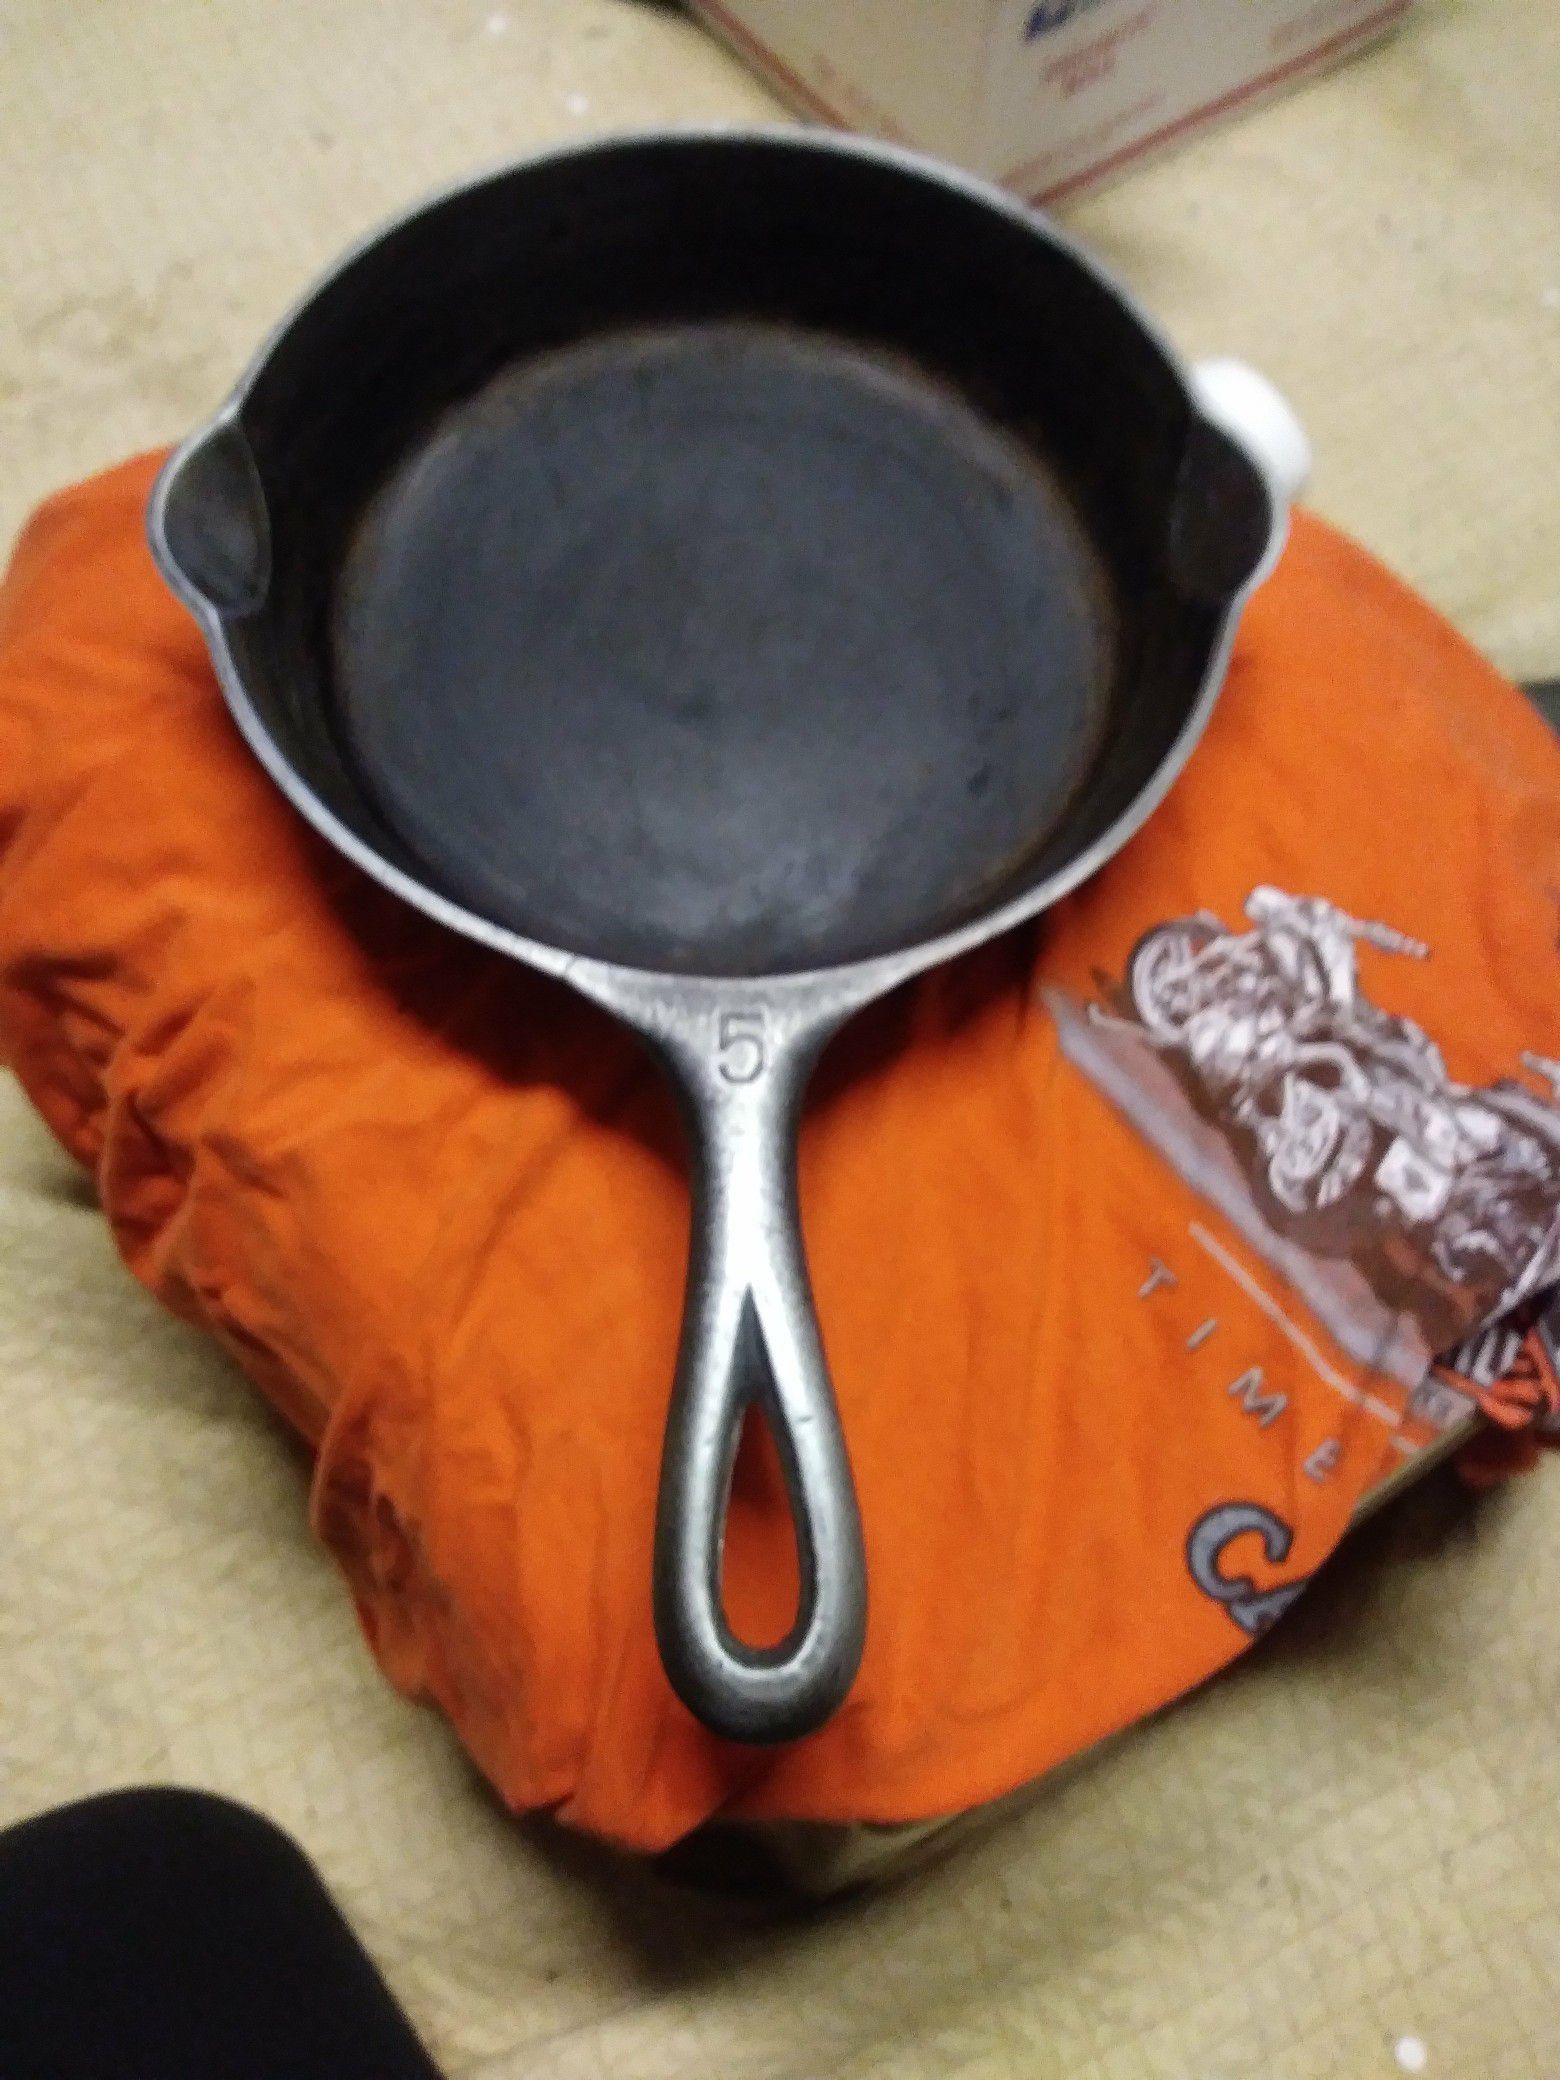 Lodge 5 piece Cast Iron cooking set. NEVER USED for Sale in Southwest  Ranches, FL - OfferUp